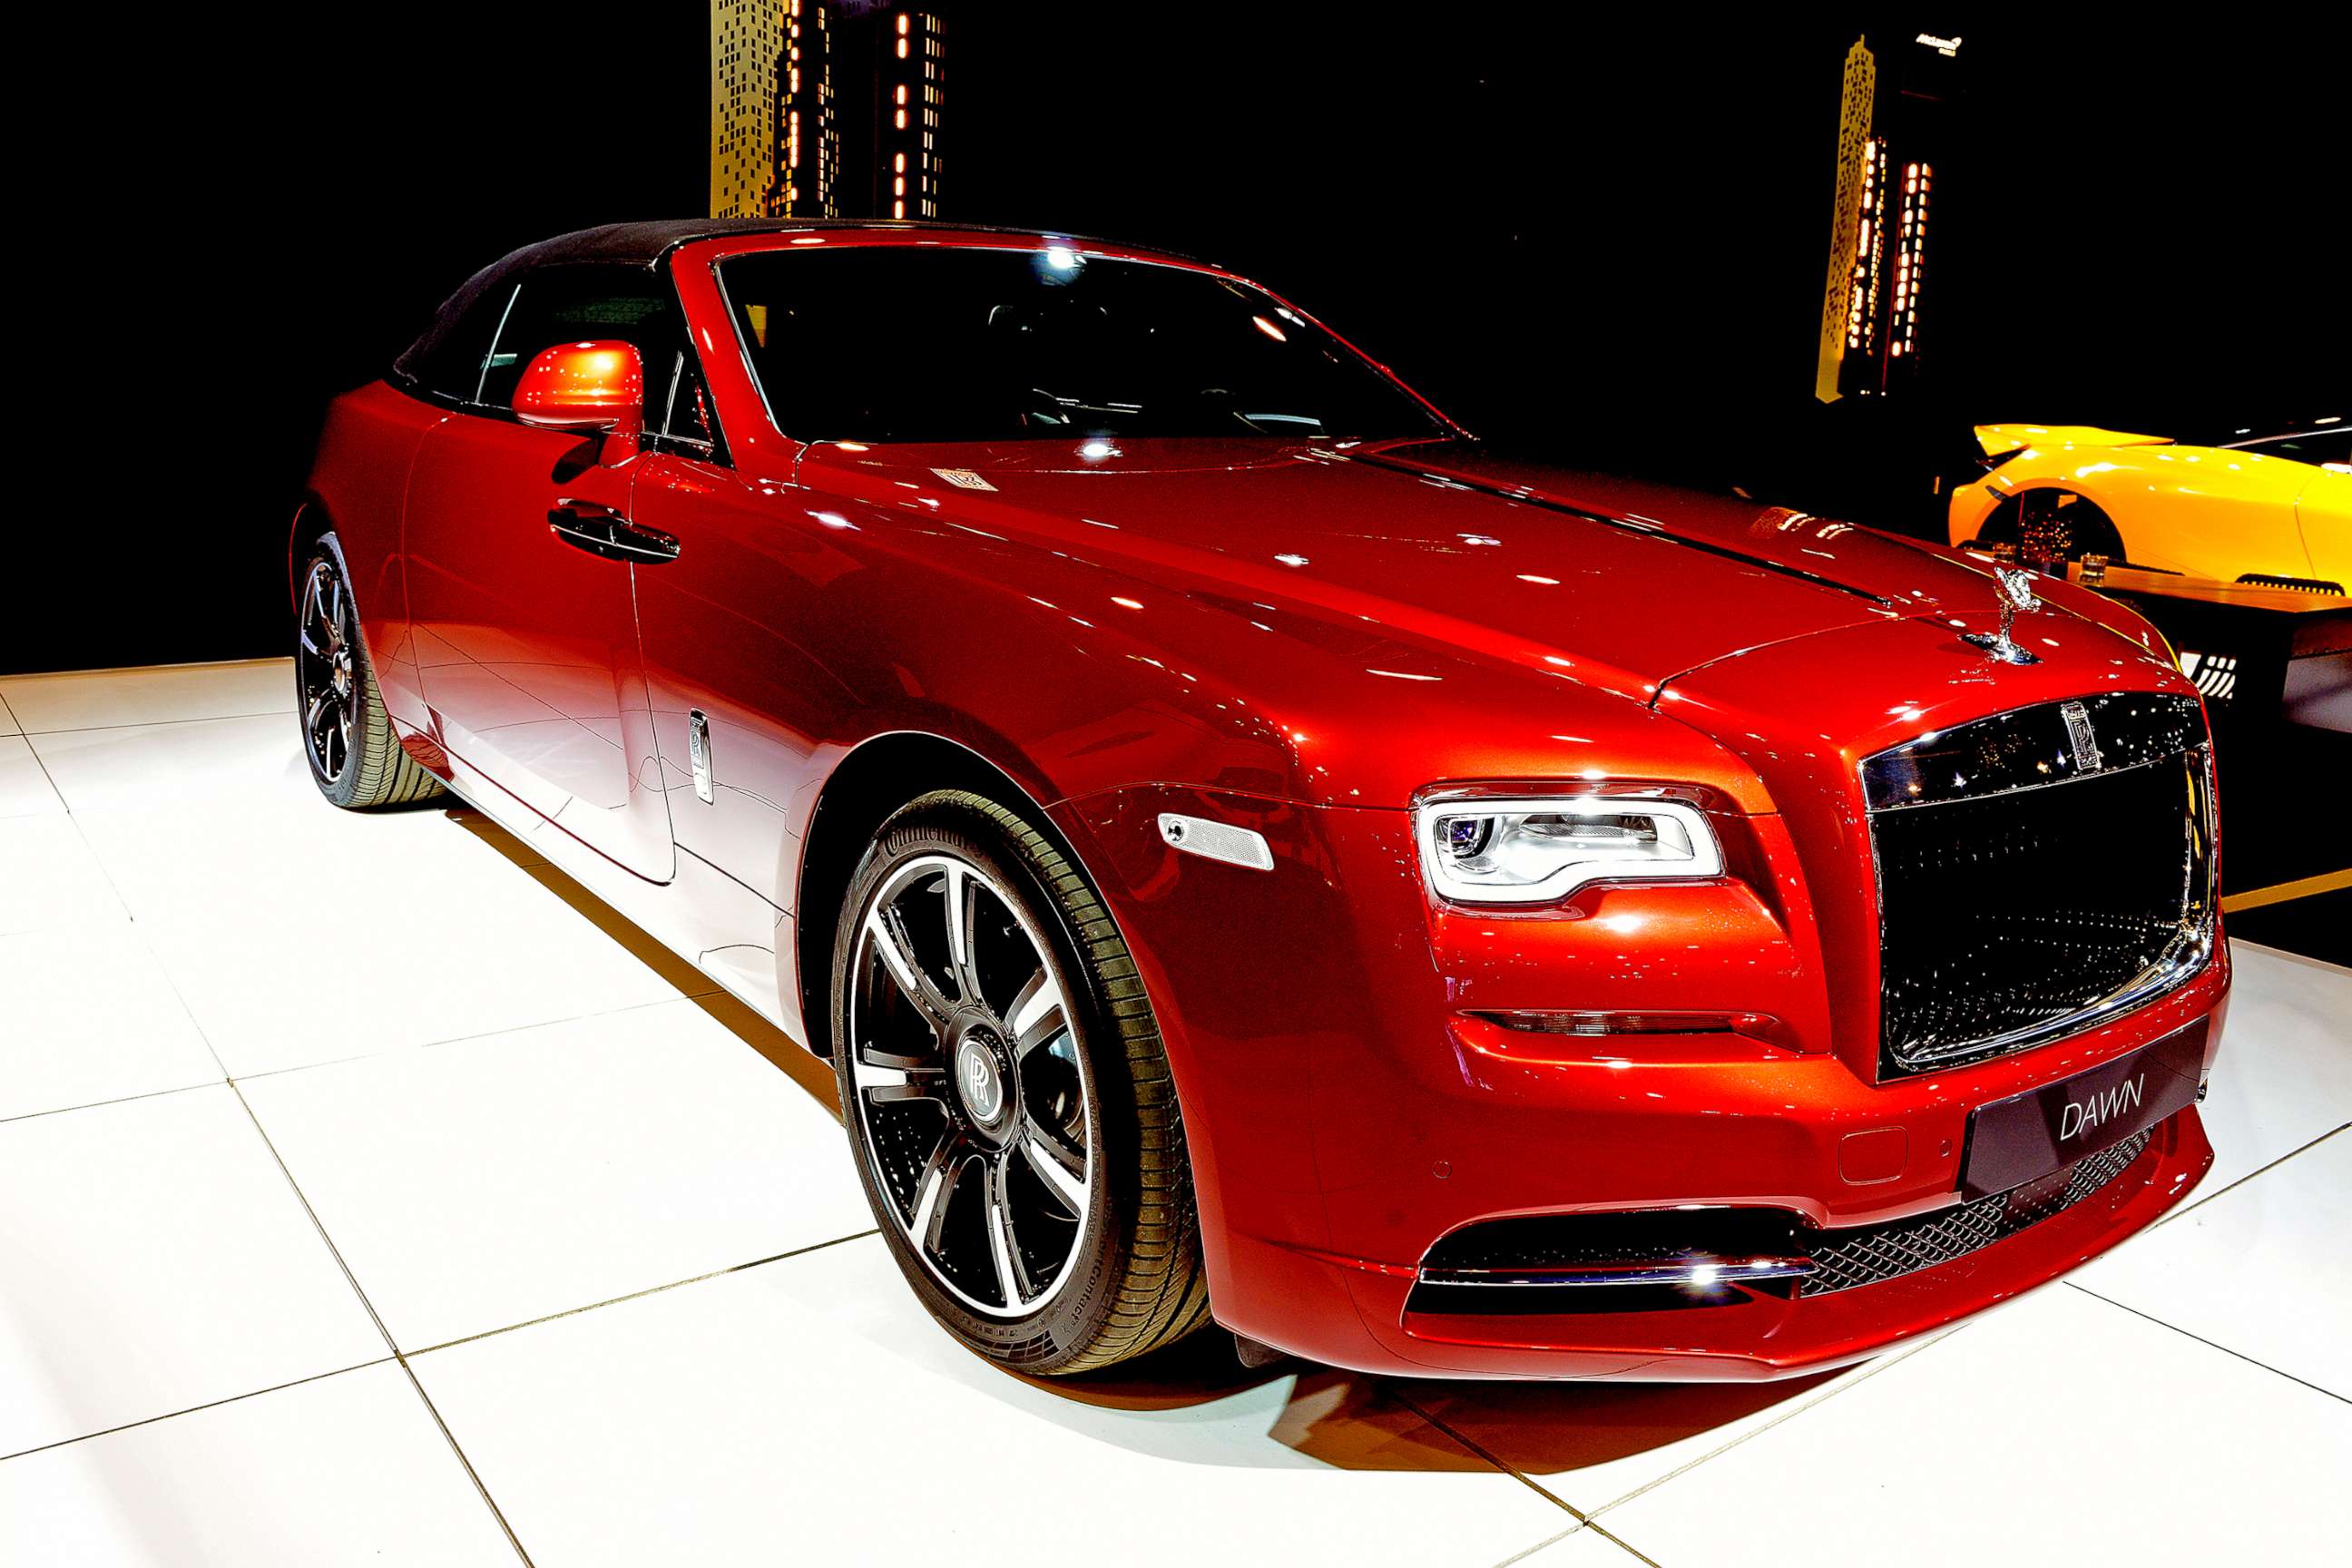 PHOTO: The Rolls-Royce Dawn on display at the Dream Car Exhibition, Jan. 17, 2019, in Brussels.